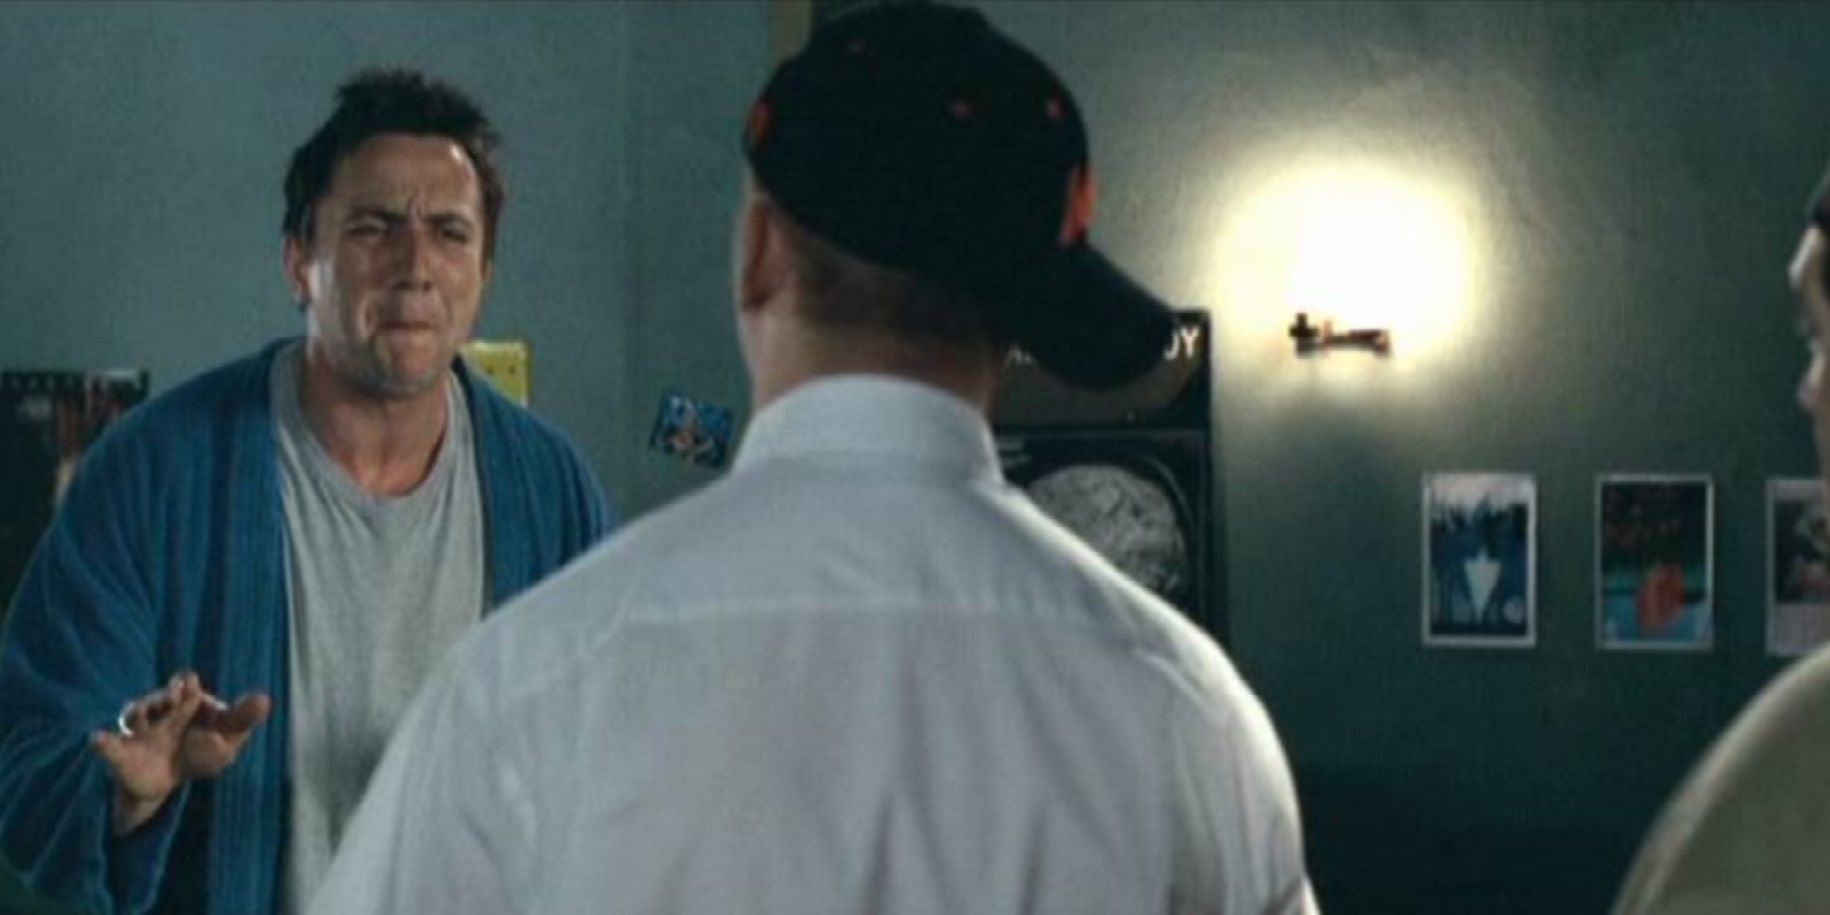 Shaun and Pete in Shaun of the Dead